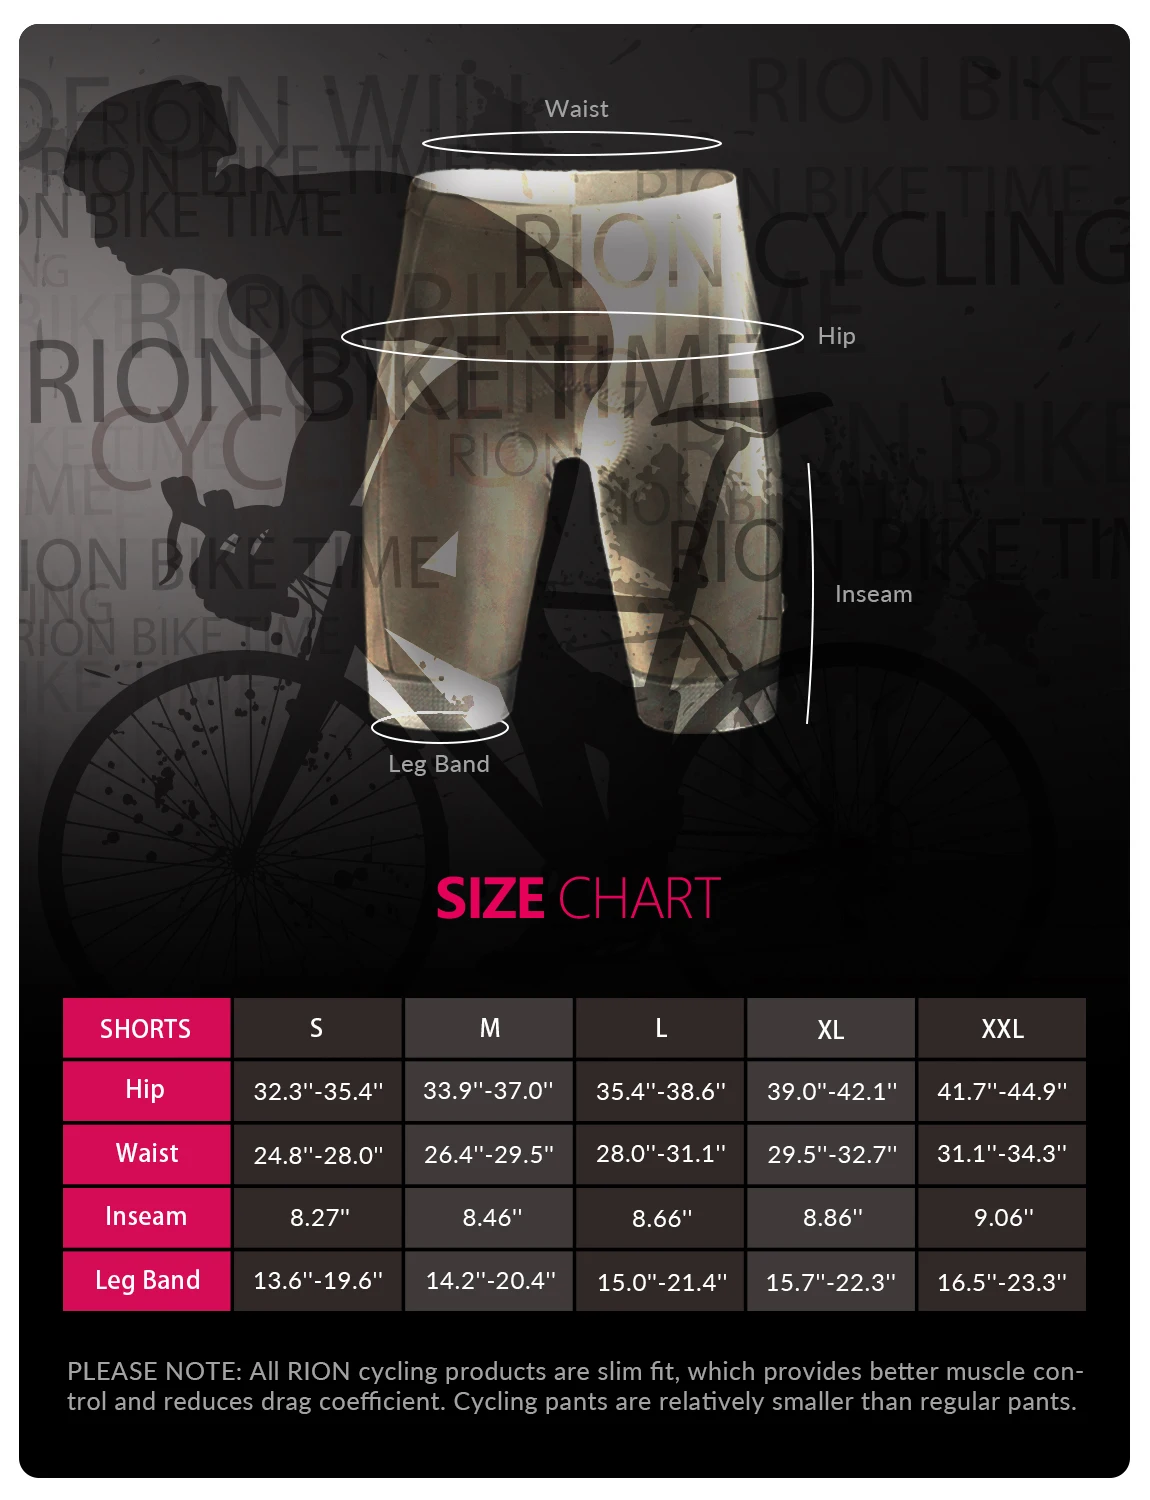 RION Women's Cycling Jersey Set MTB Mountain Bike Pad Shorts Bicycle Cycling Female Clothes Set Bicicleta Ciclismo Ropa mujer